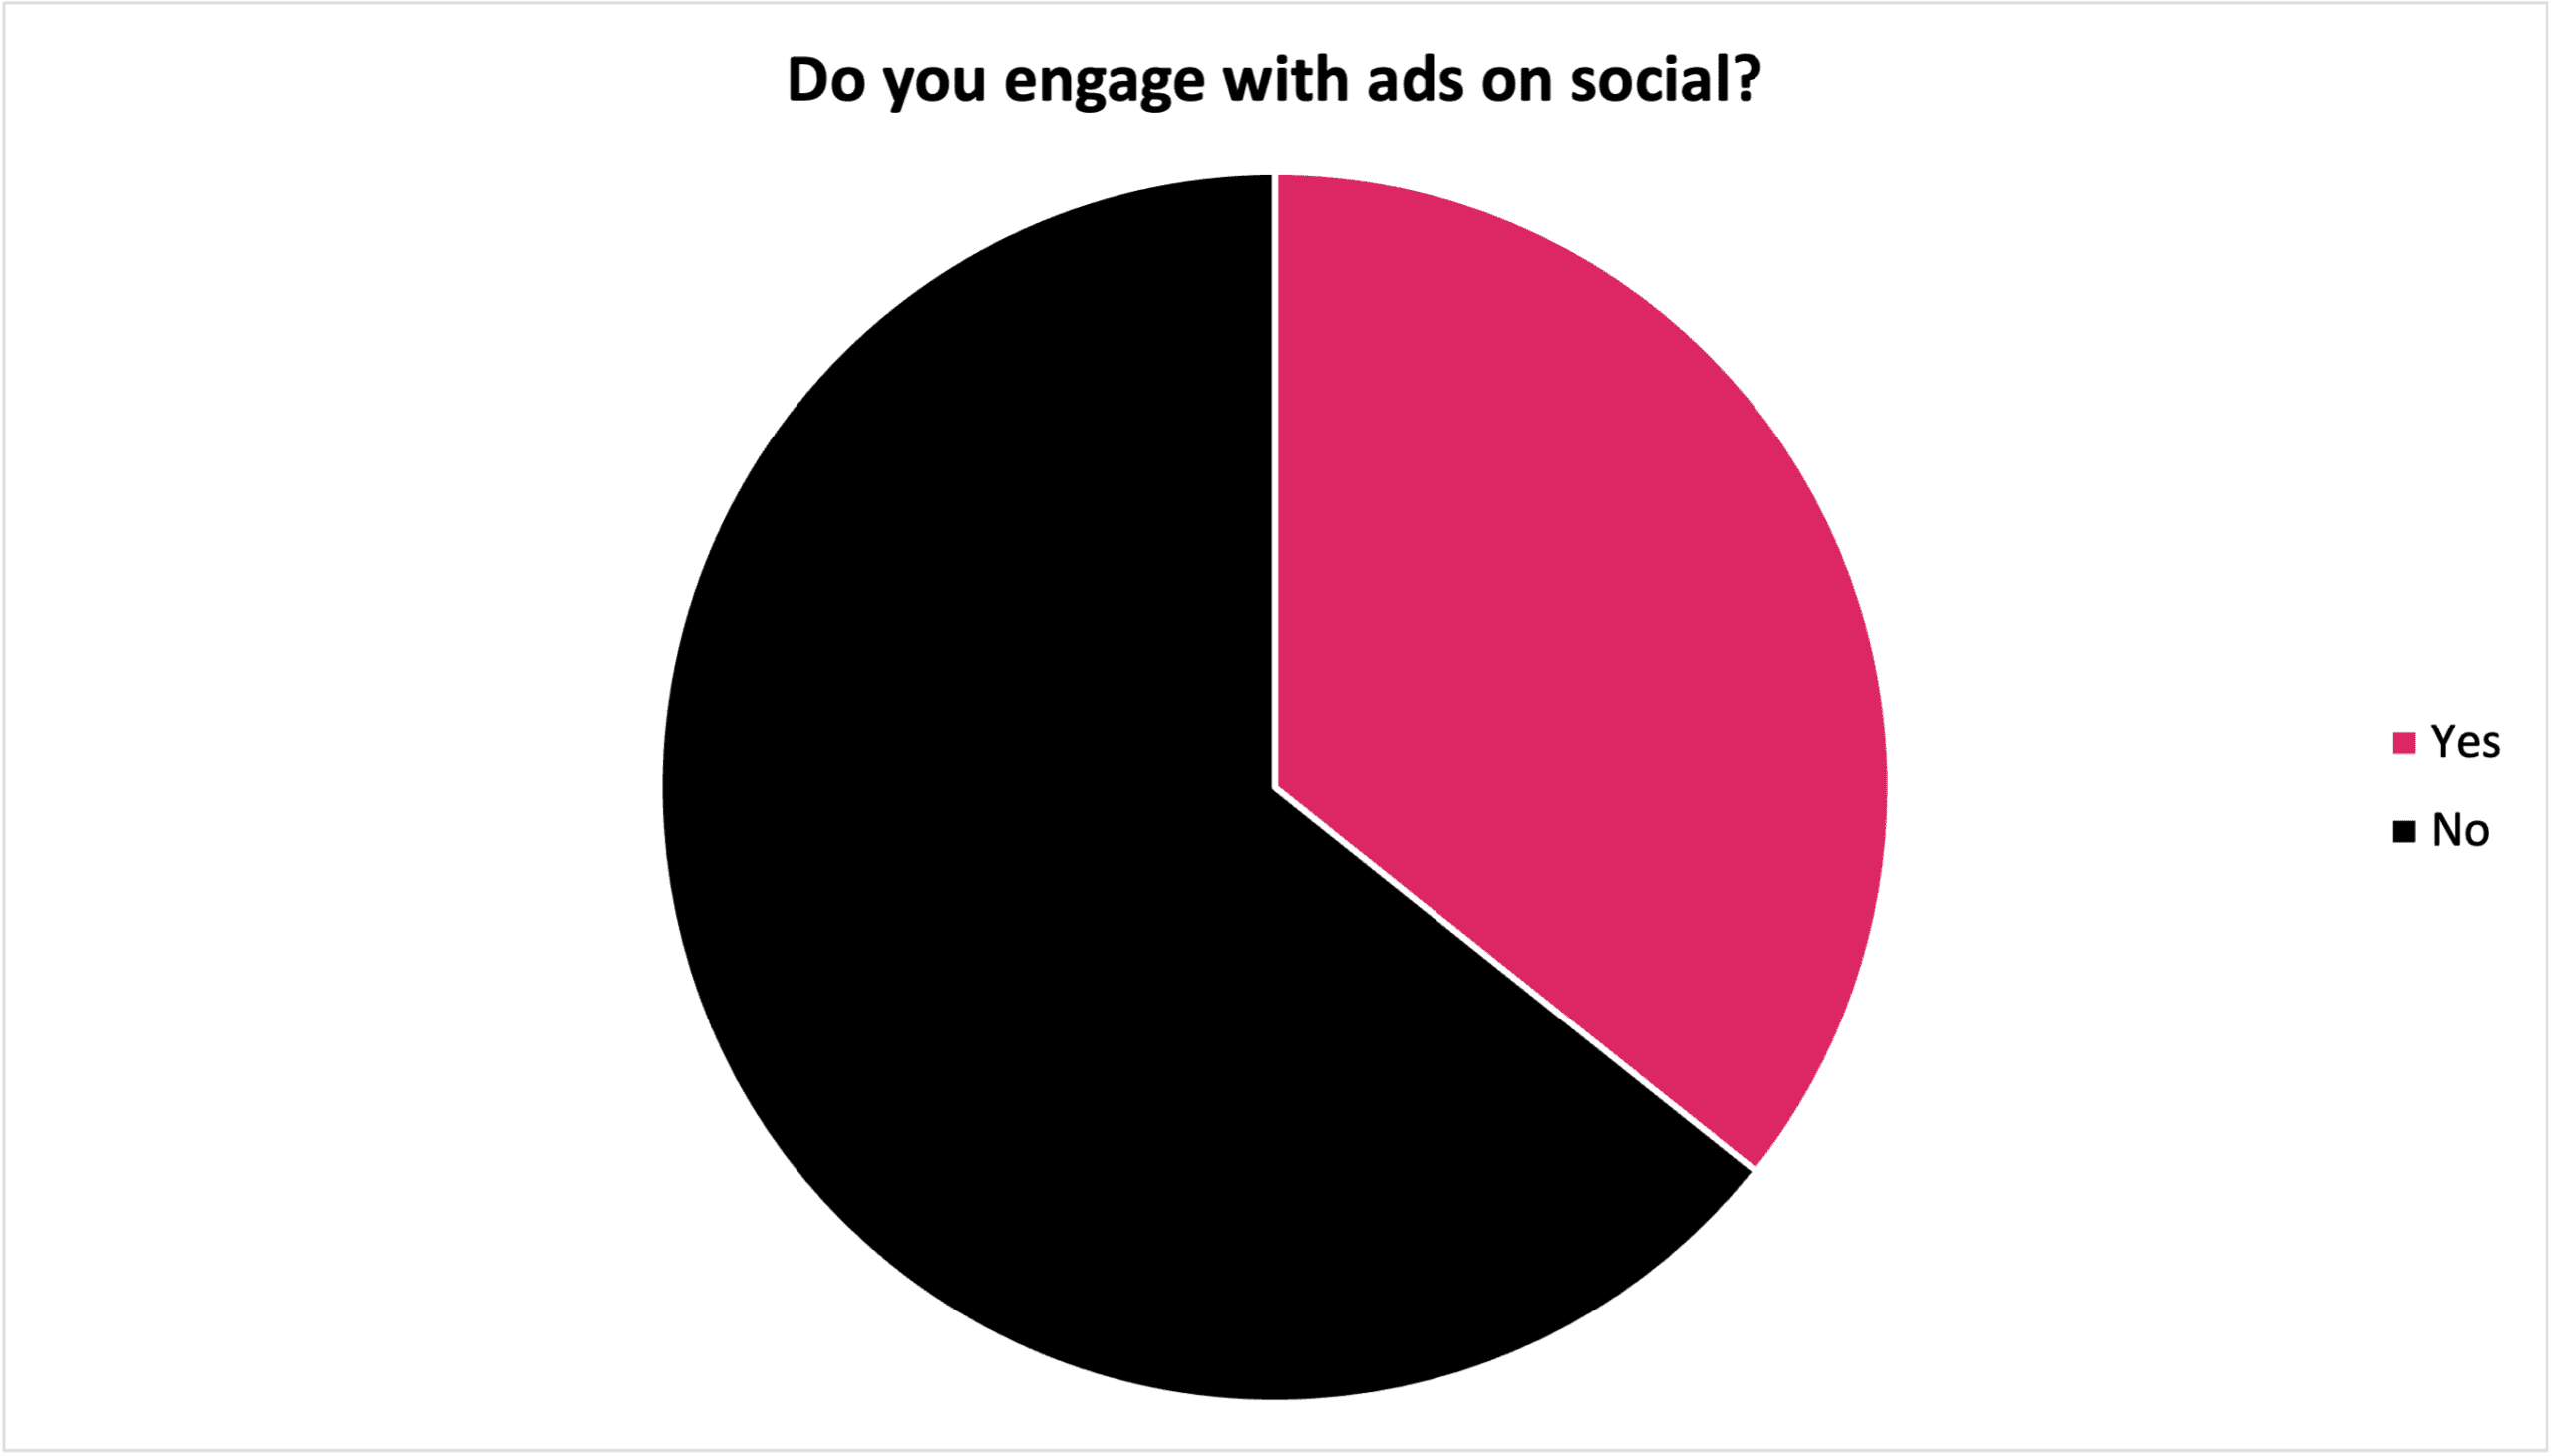 Pie chart: Do you engage with ads on social? 66% of respondents answered "no", 33% answered "yes".